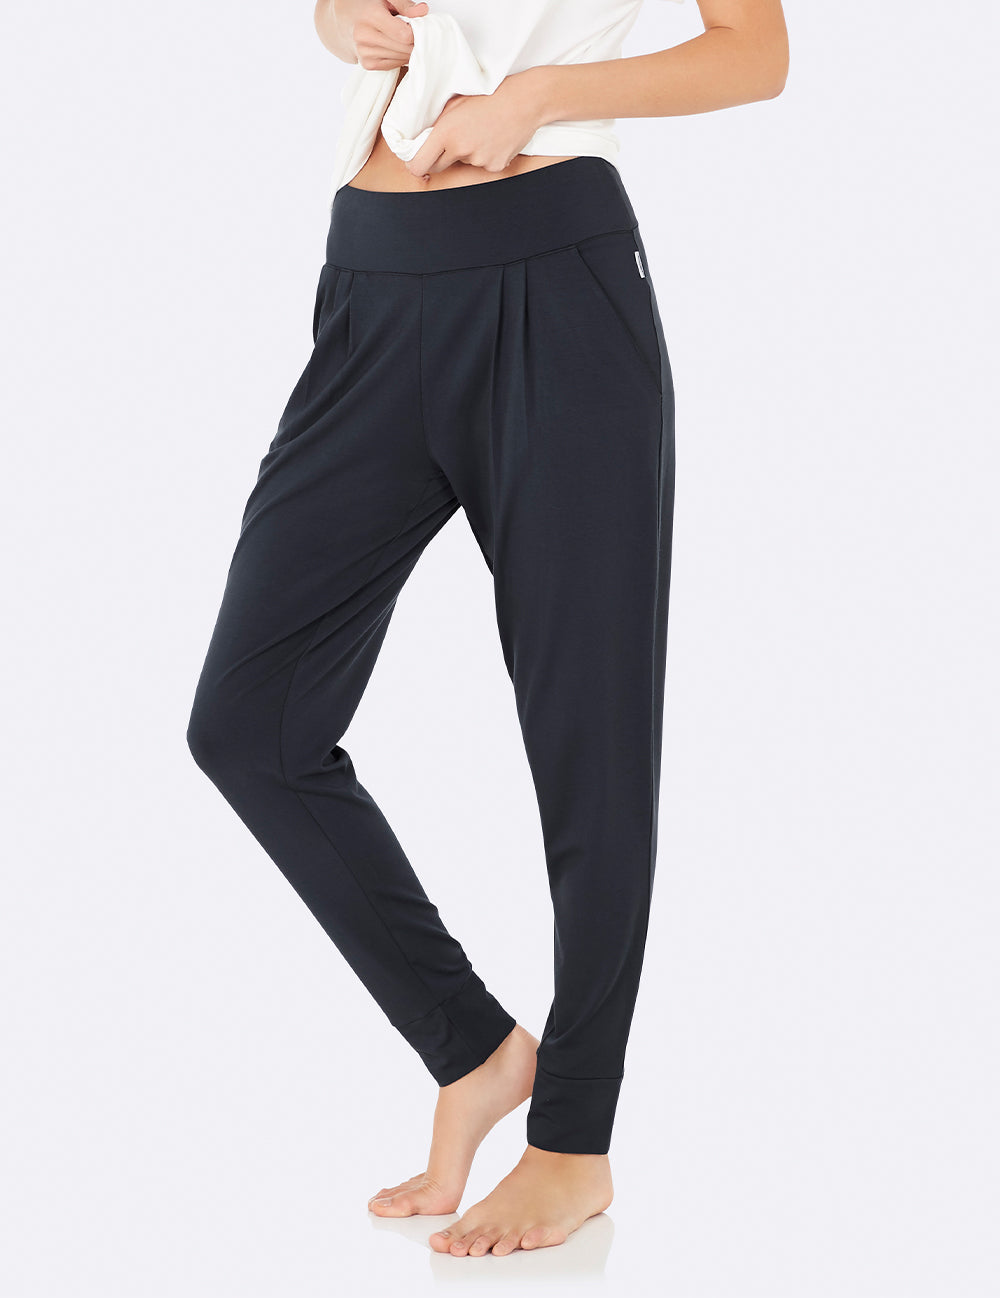 Boody Downtime Crop Pants - Black – babygoodswarehouse